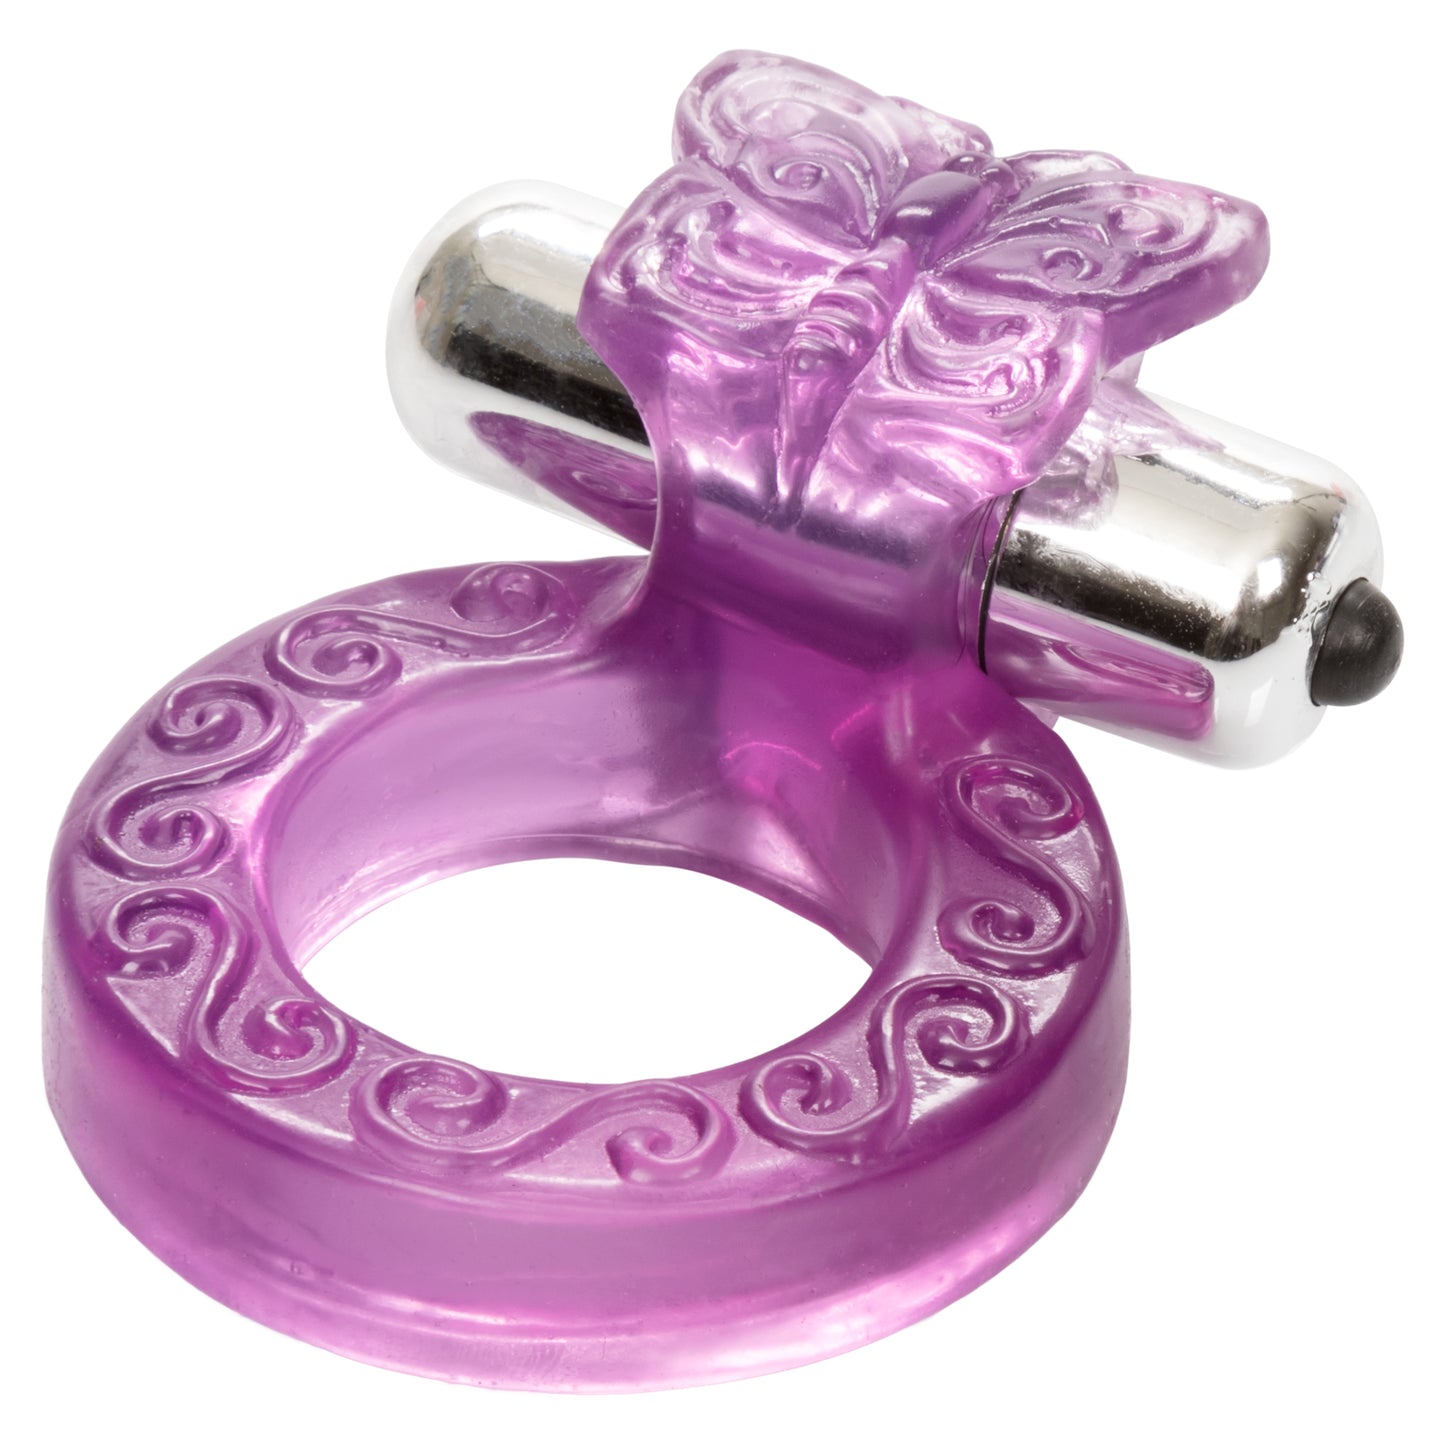 Intimate Butterfly Ring™